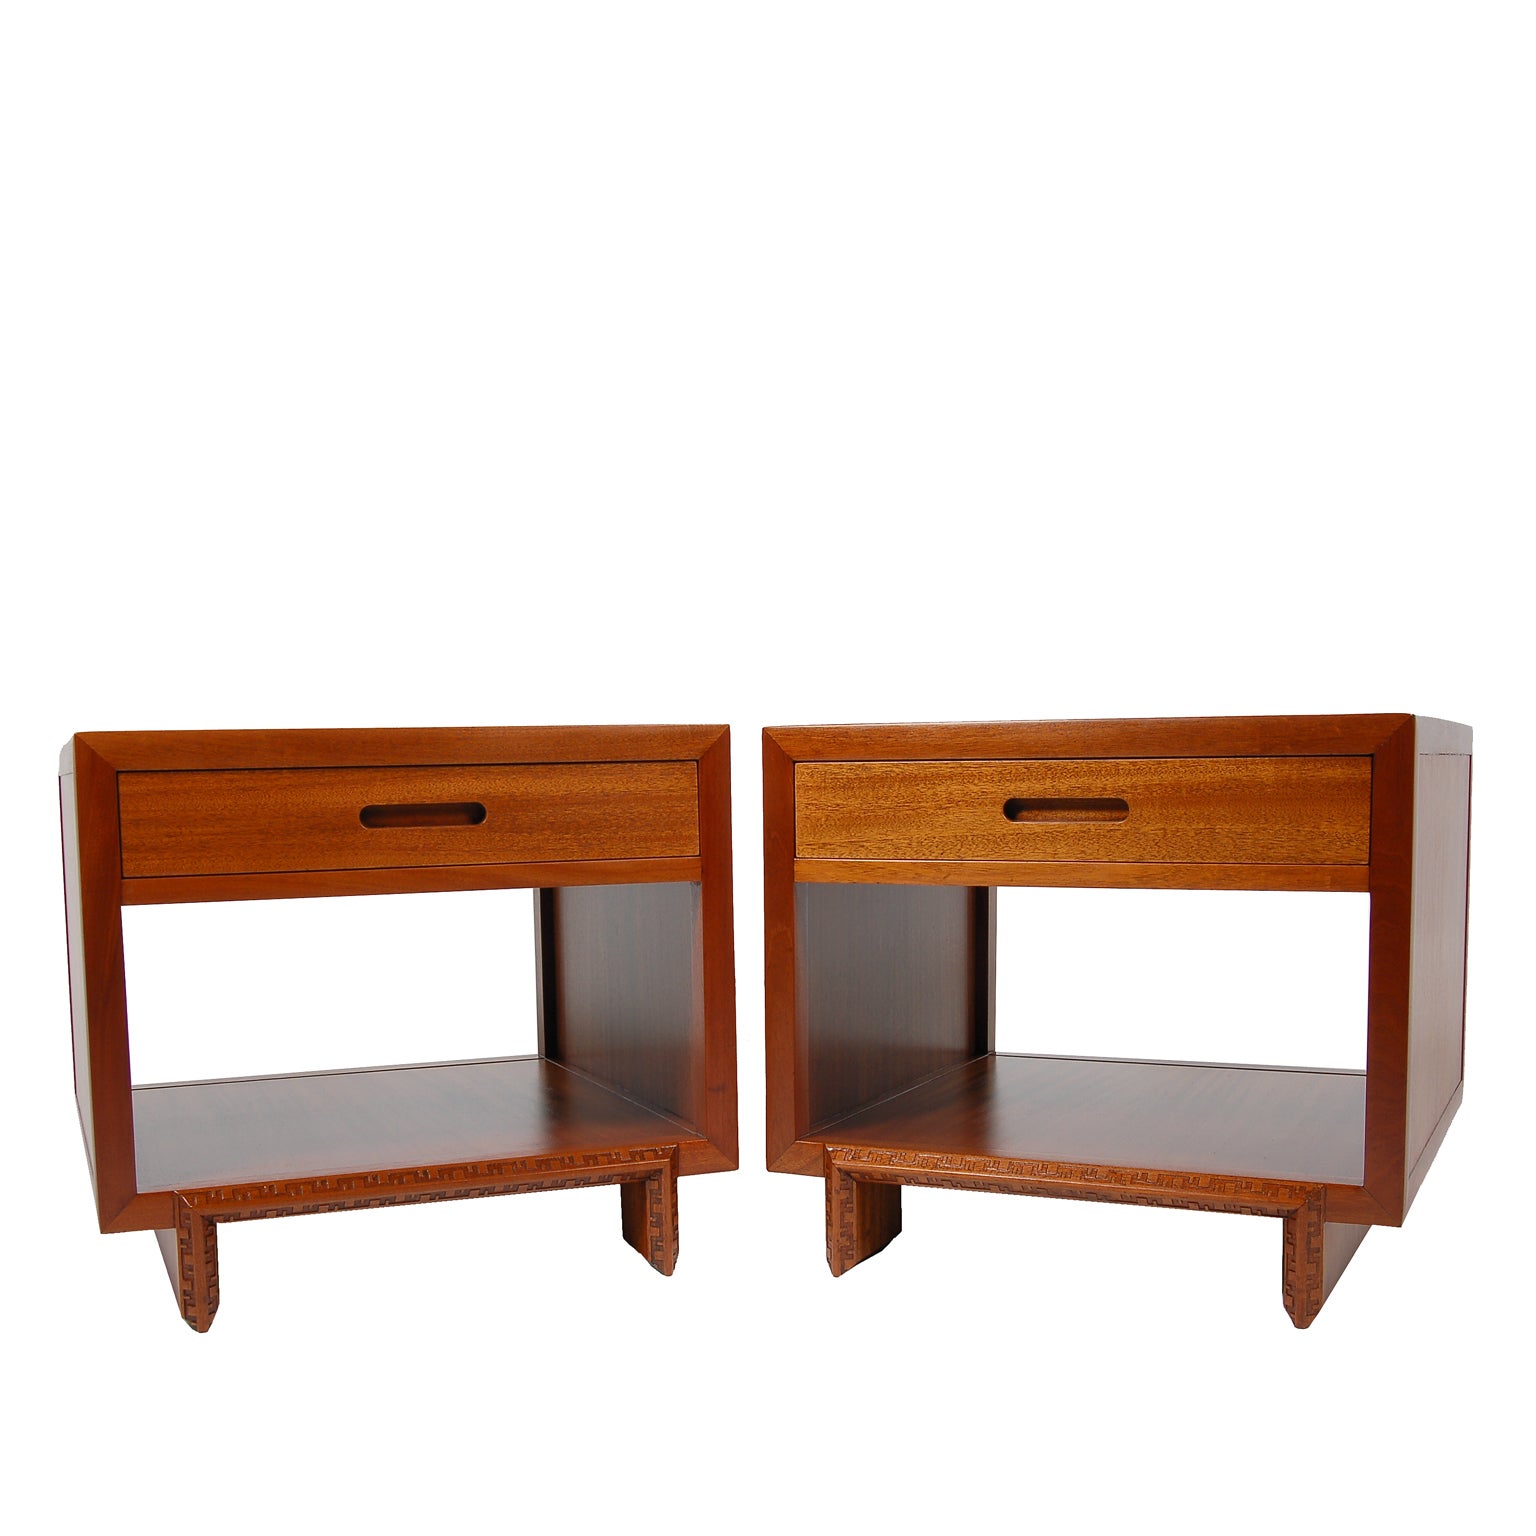 Pair of Nightstands/Side Tables by Frank Lloyd Wright